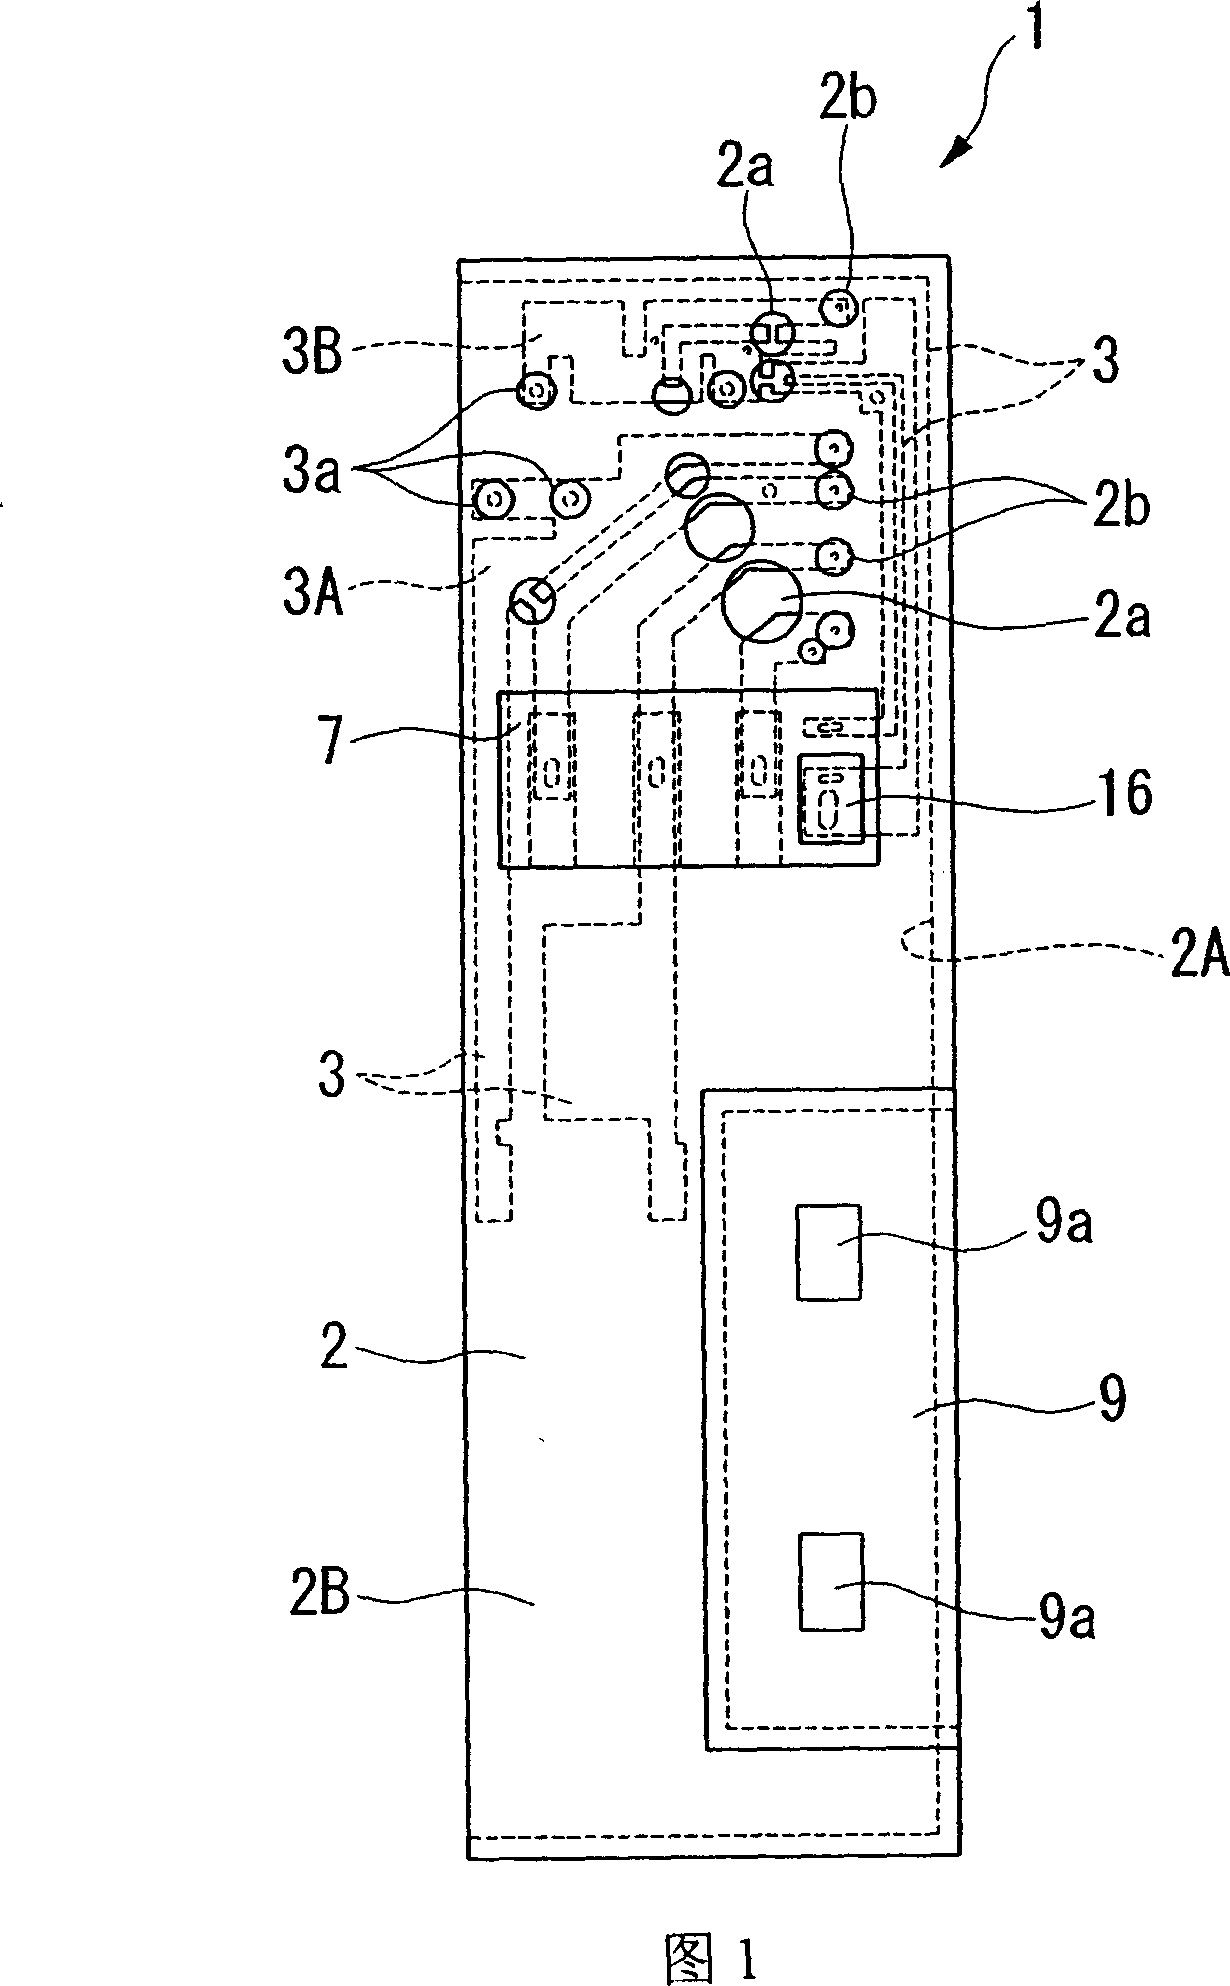 Electrical protecting cover, electrical device and method for assembling electrical device